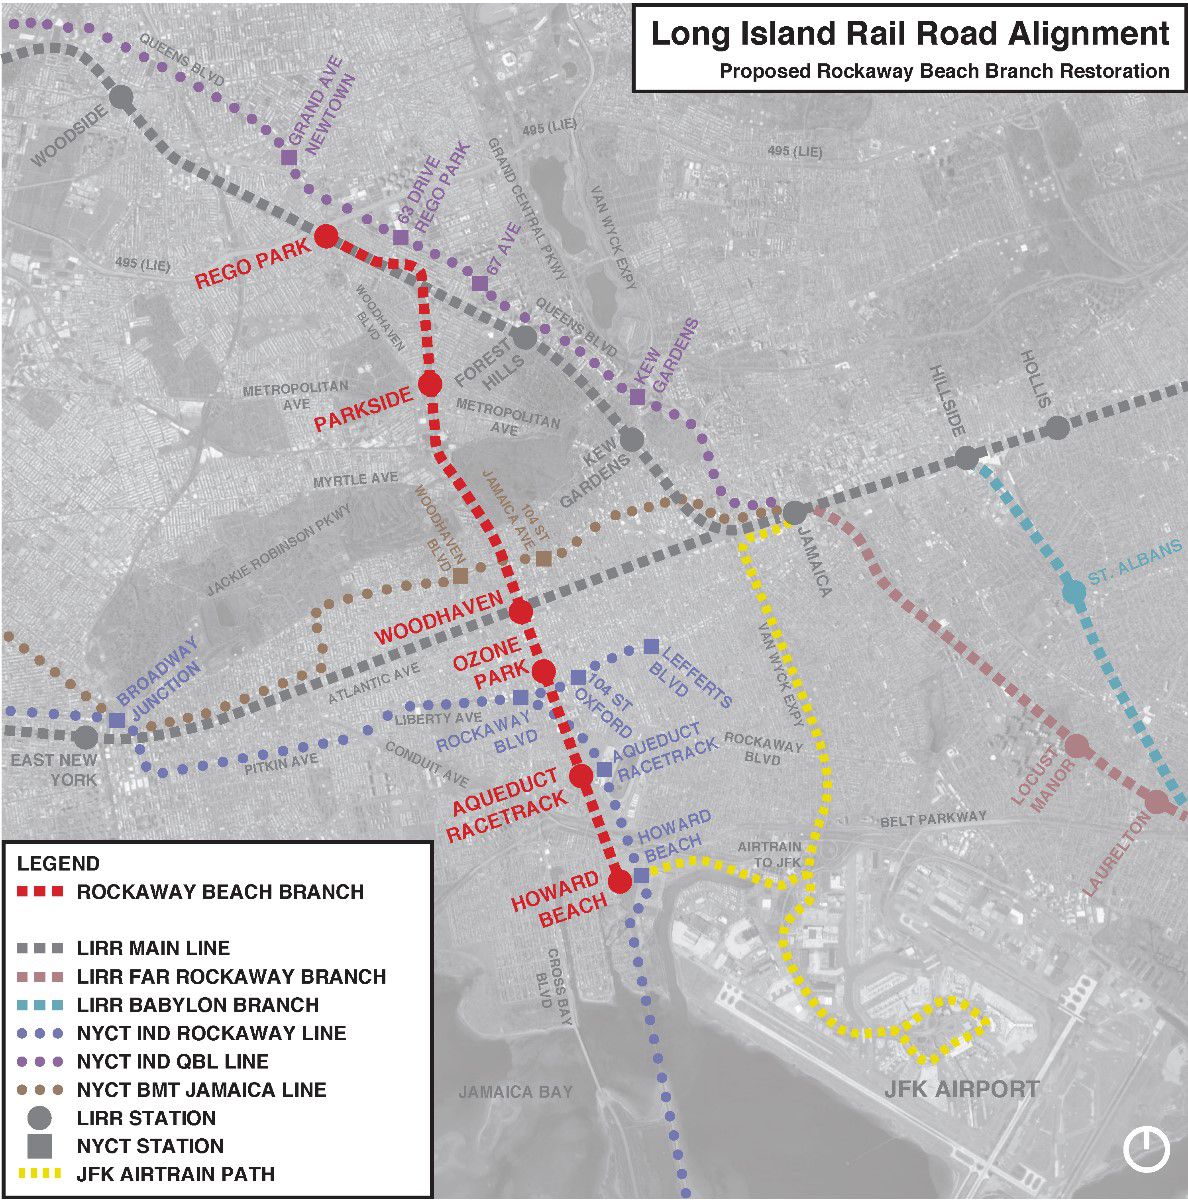 A map that depicts where the proposed LIRR spur will reconnect to the Long Island Rail Road while positioning it in the larger public transportation framework of the area.